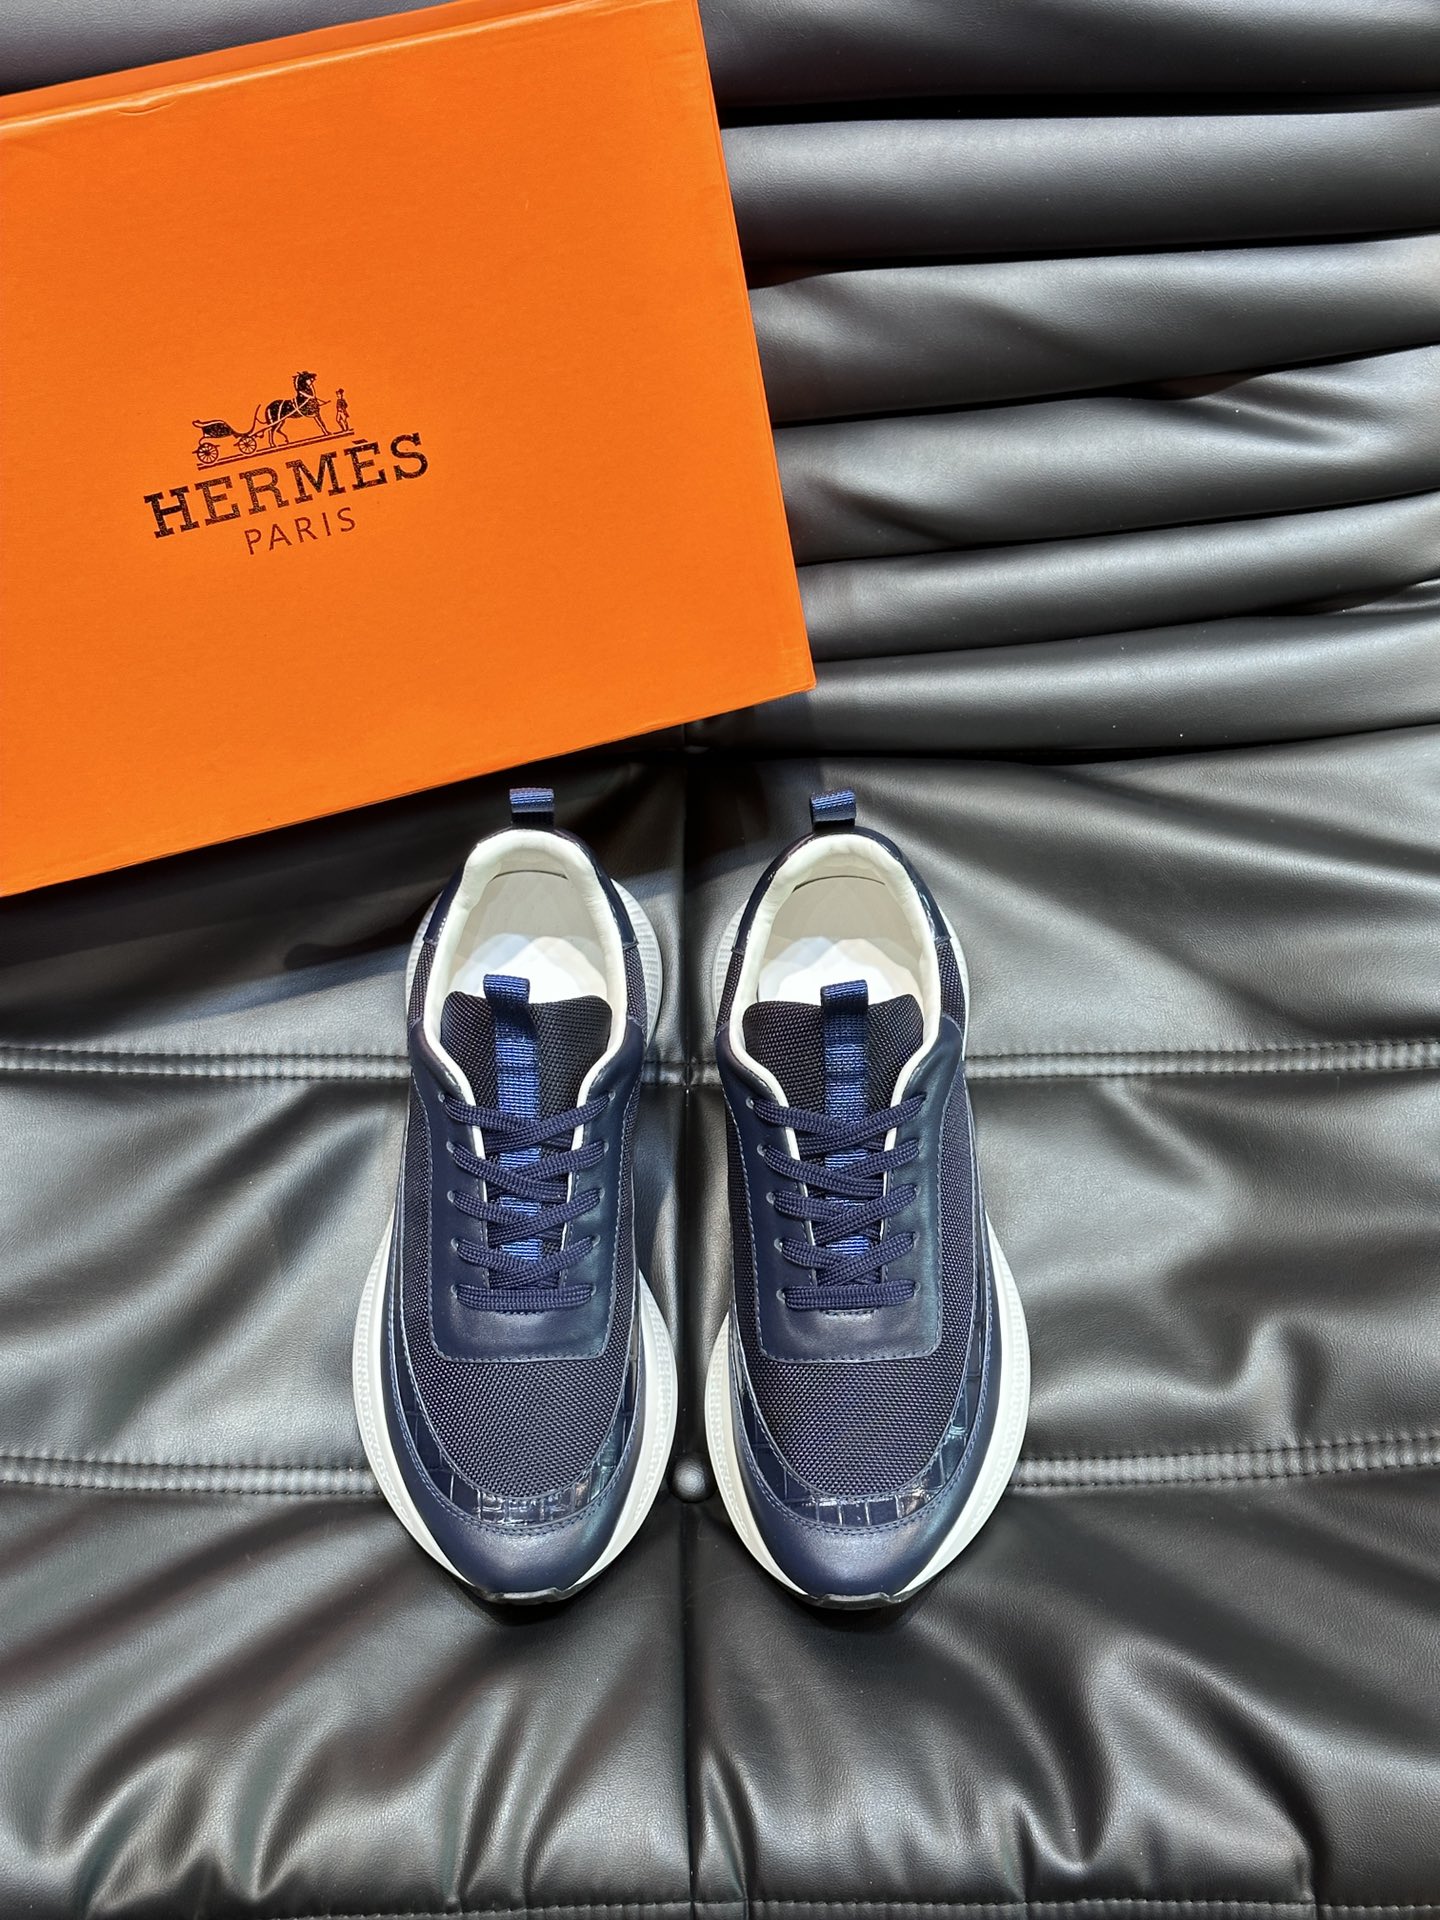 Hermes Shoes Sneakers High Quality Customize
 Splicing Cowhide Rubber Fashion Casual